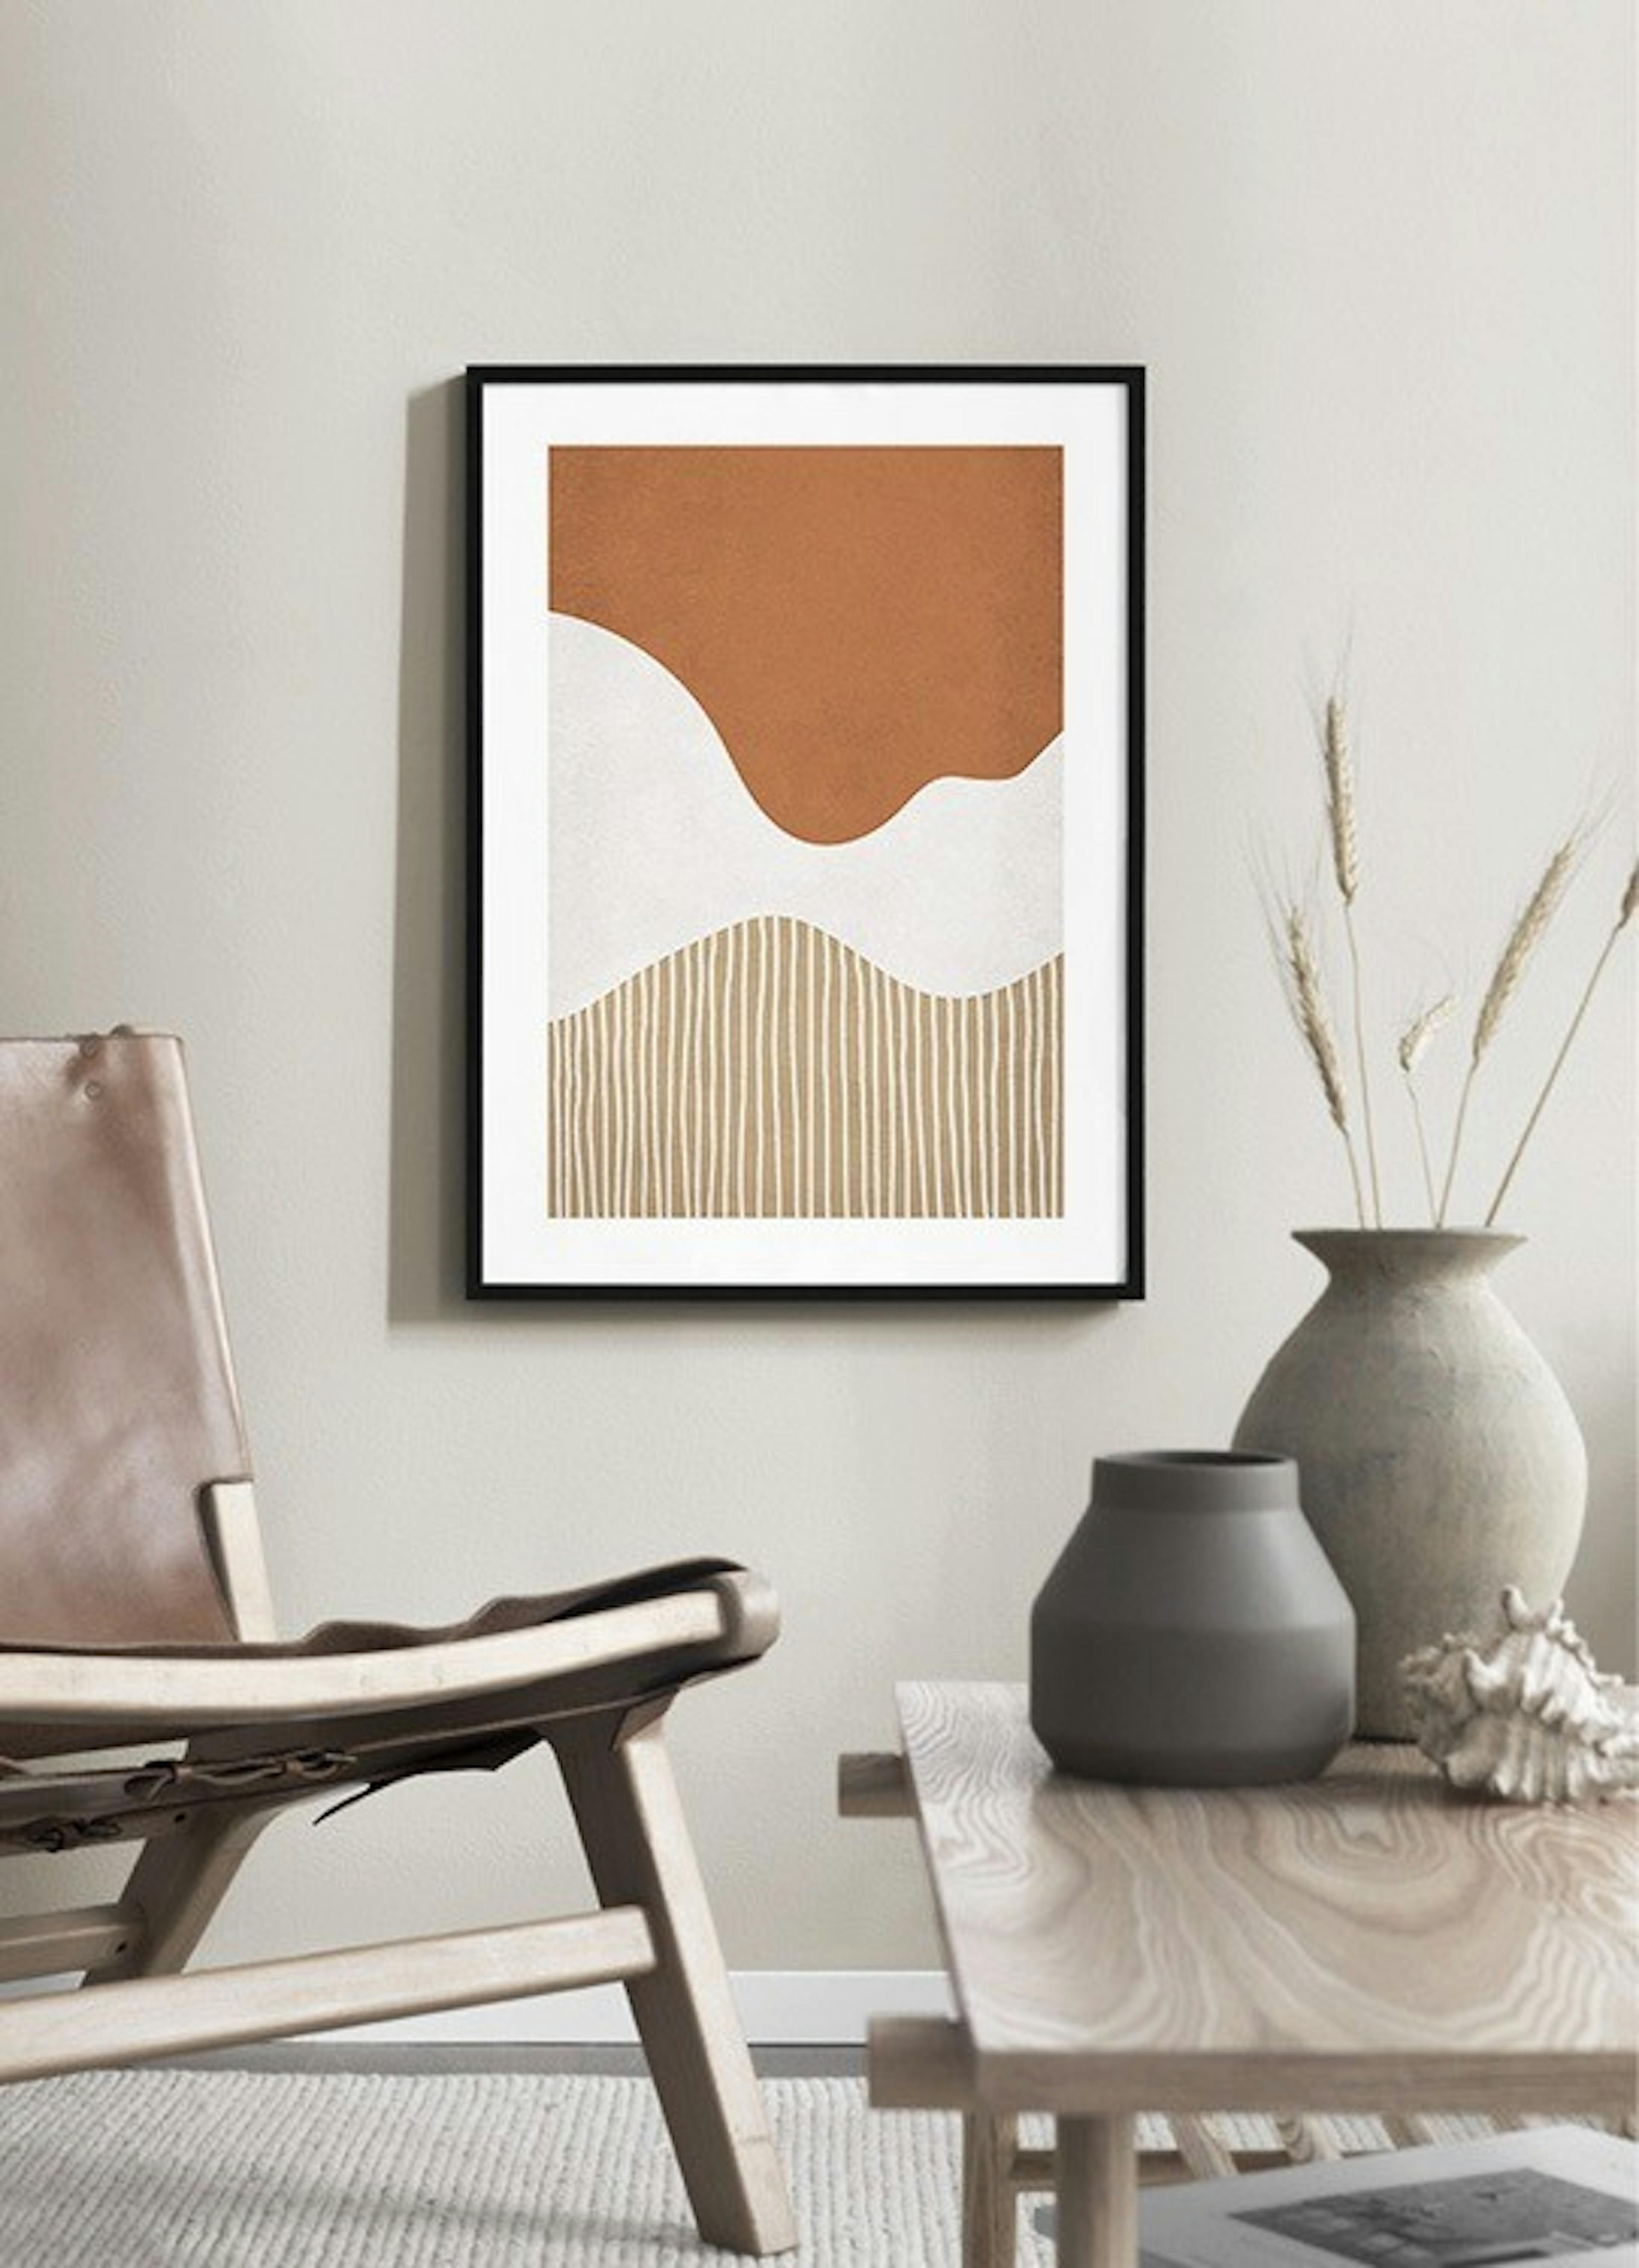 Abstract Shapes and Lines Print